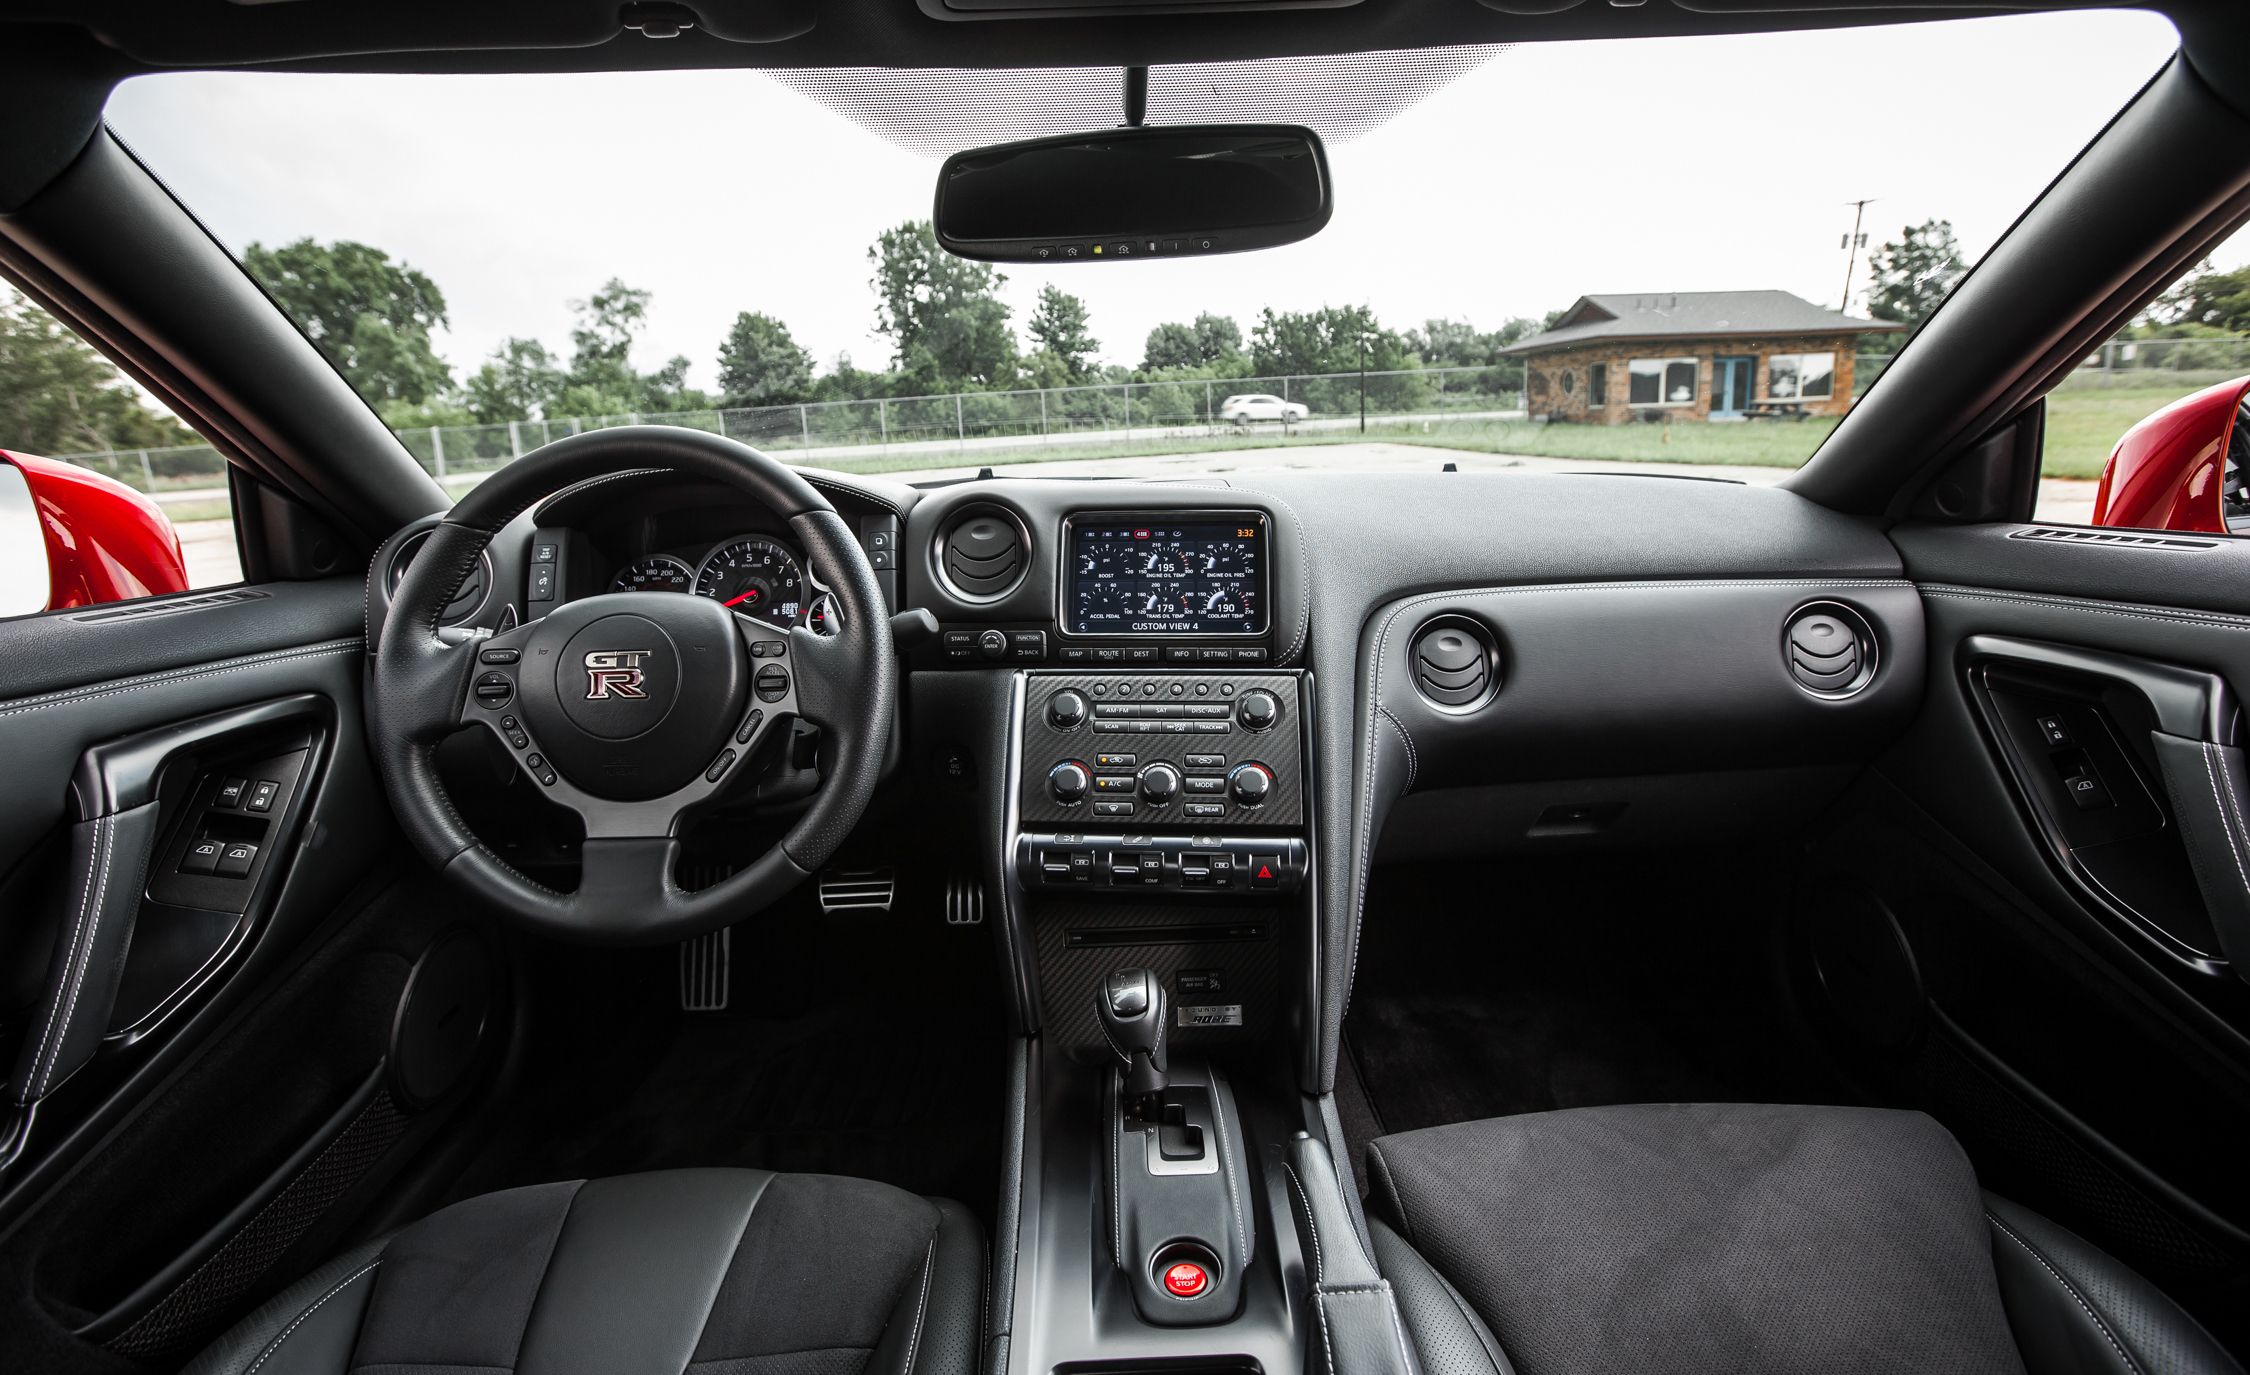 2015 Nissan GT R Interior (View 15 of 25)